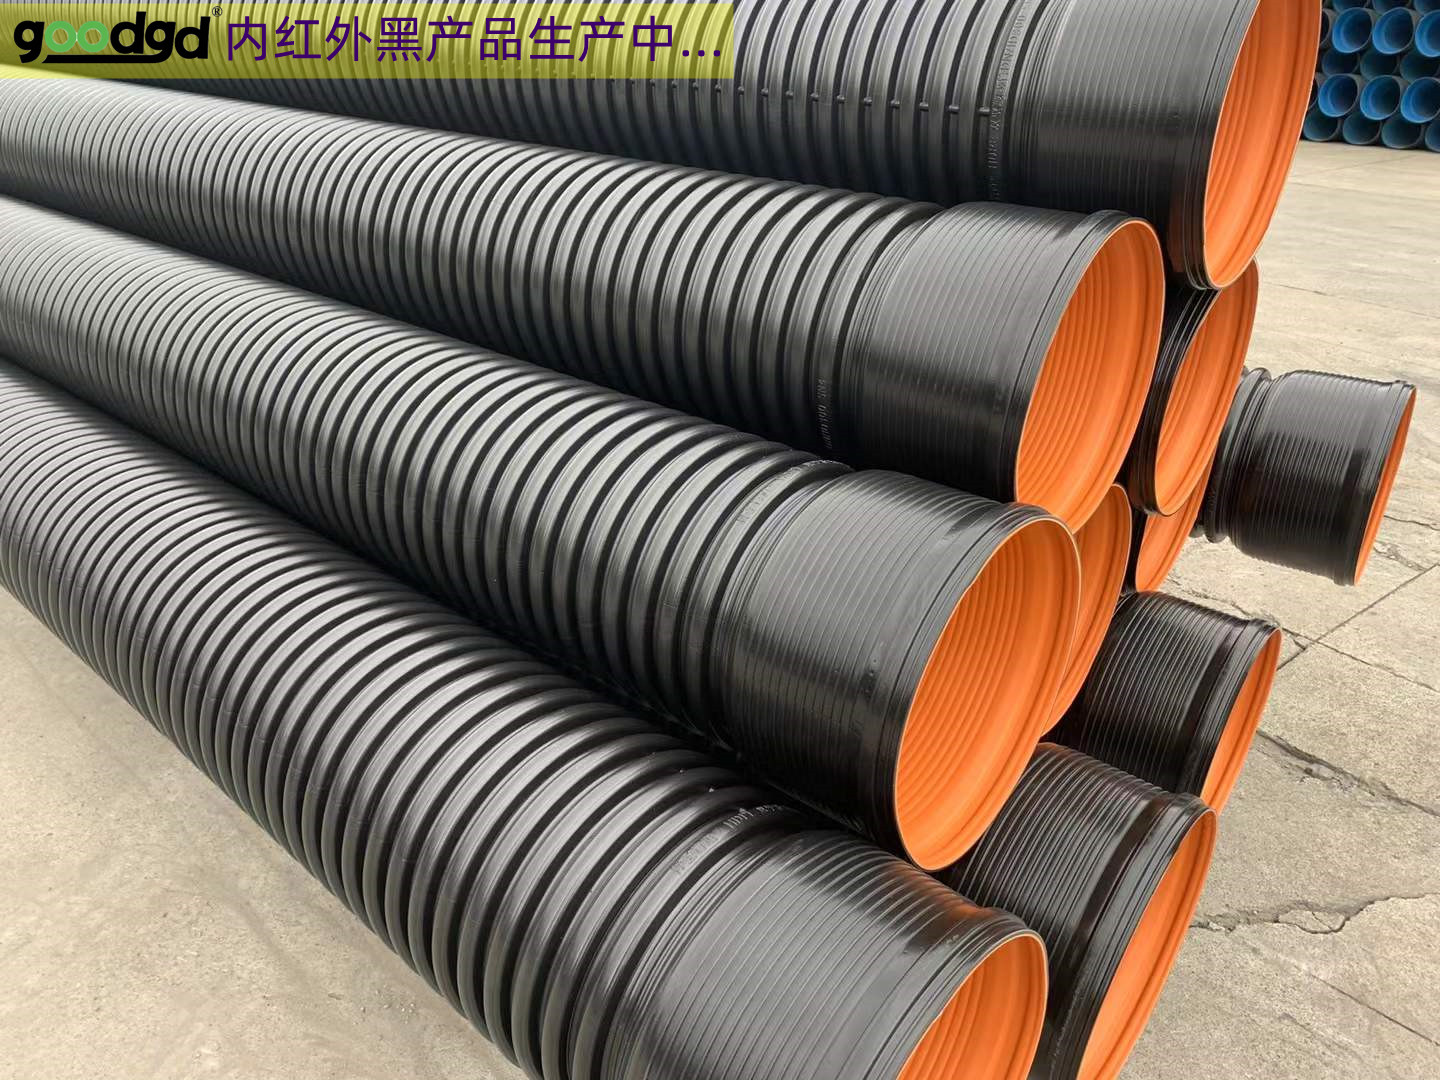 HDPE Double Wall Corrugated Pipe Ground Fixation Technology Large Diameter Drainage Urban Pipe Network Buried Sewage Discharge